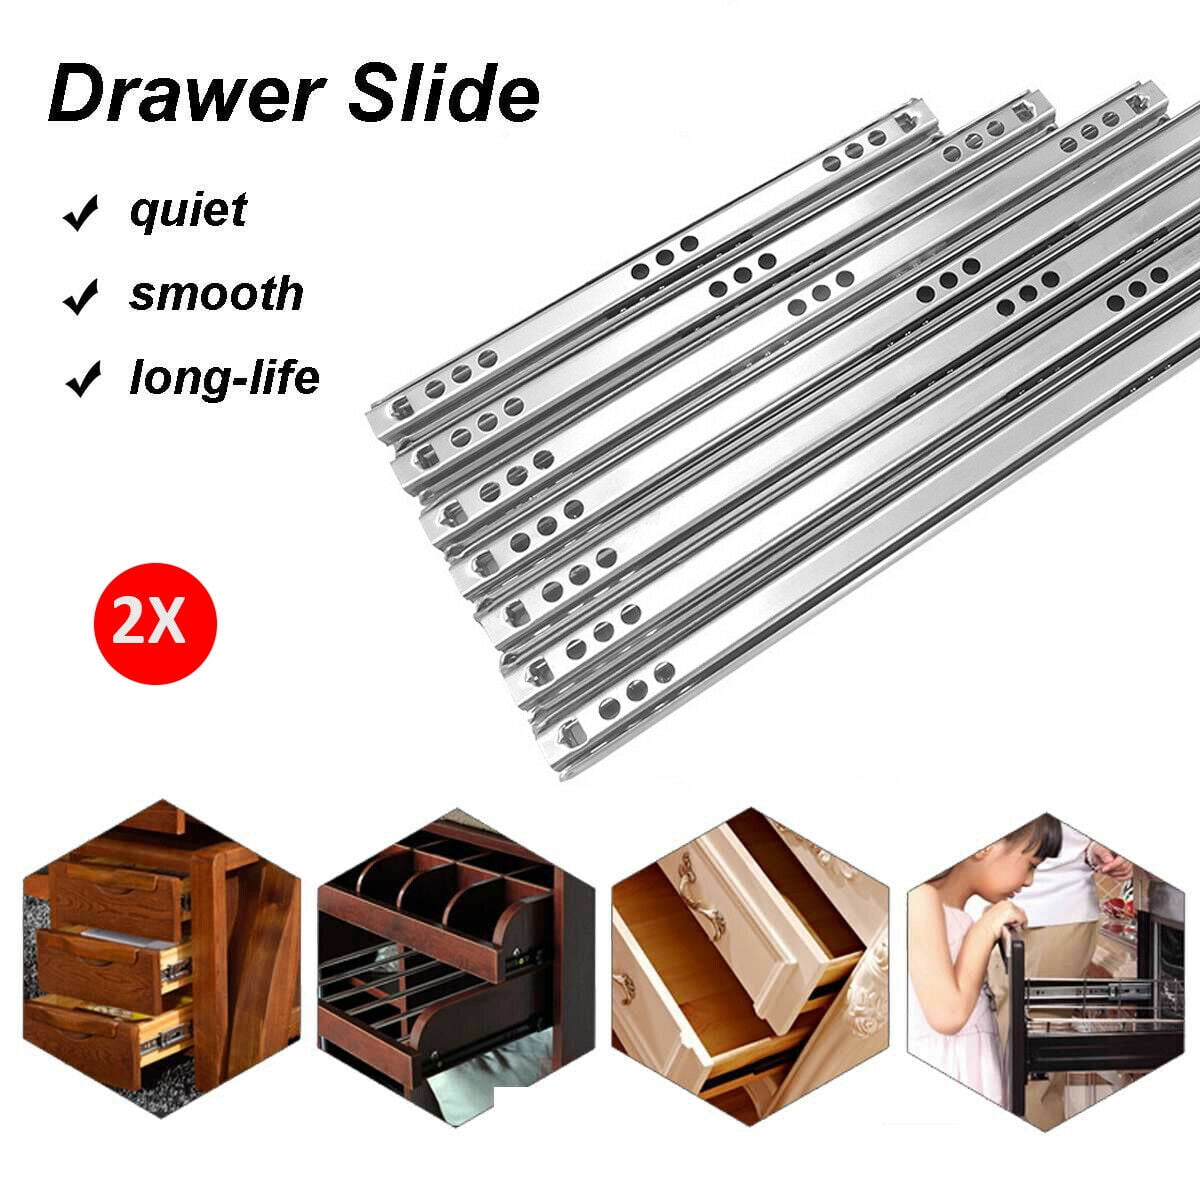 16inches/406mm,Silver 1 Pair Drawer Ball Bearing Drawer Slides Rail Telescopic Steel Heavy Duty Fully Extension Soft Close Drawer Runners